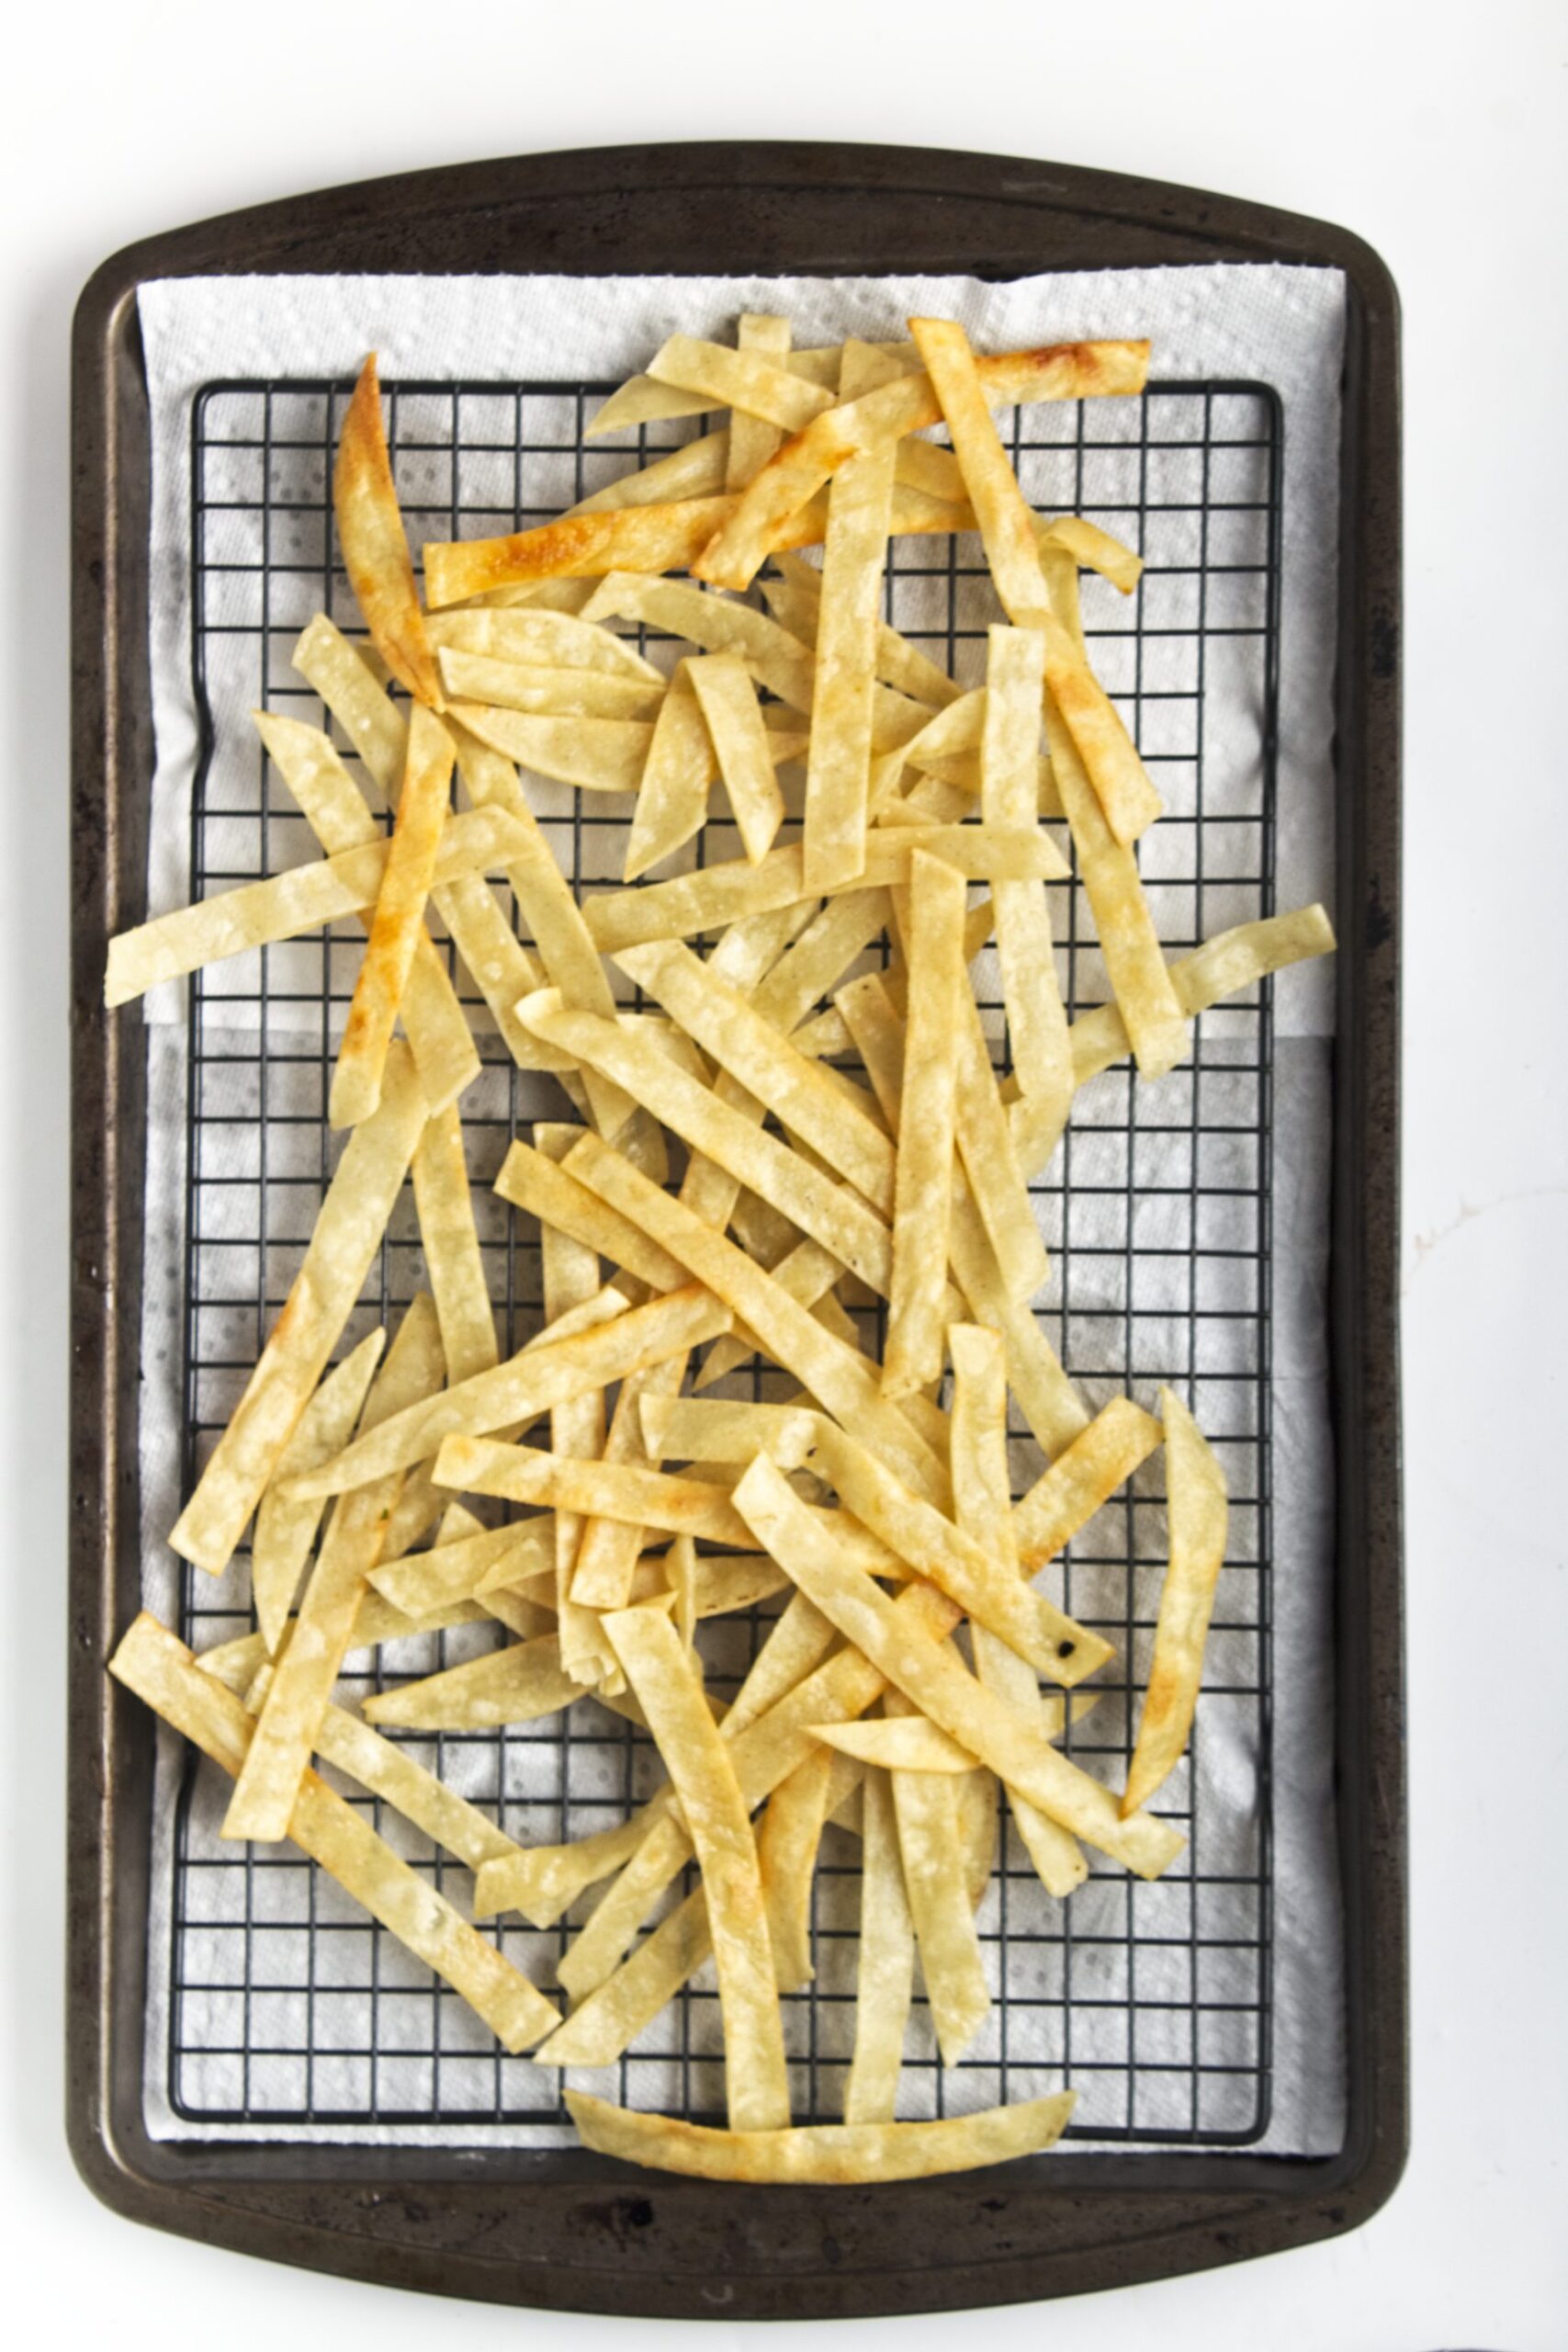 Fried crispy tortilla strips sitting on a baking sheet lined with paper towel